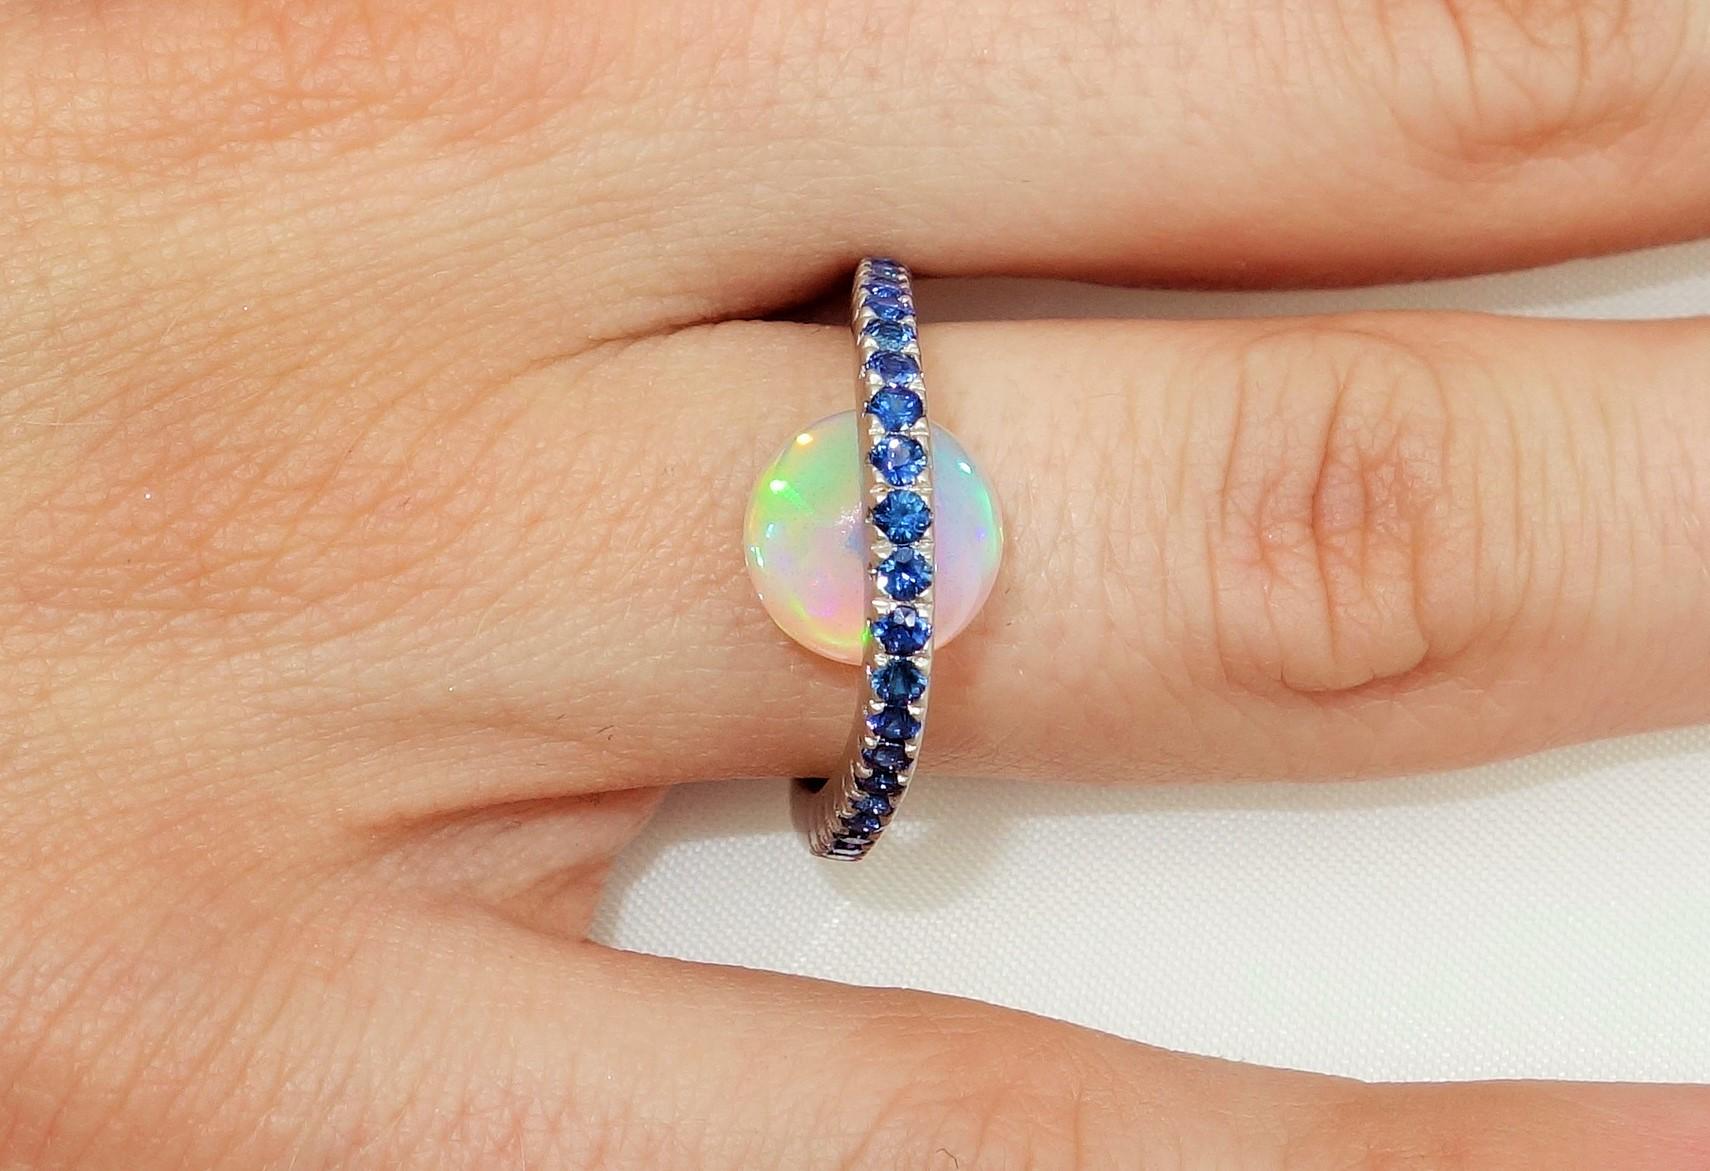 Top of ring set with Blue Sapphires, featuring a 3.63 Carat Ethiopian Opal below; Blue Sapphires approx. .70tctw; Sterling Silver Tarnish-resistant Rhodium mounting Ring size 6, we offer ring re-sizing. More fabulous in person...A Striking